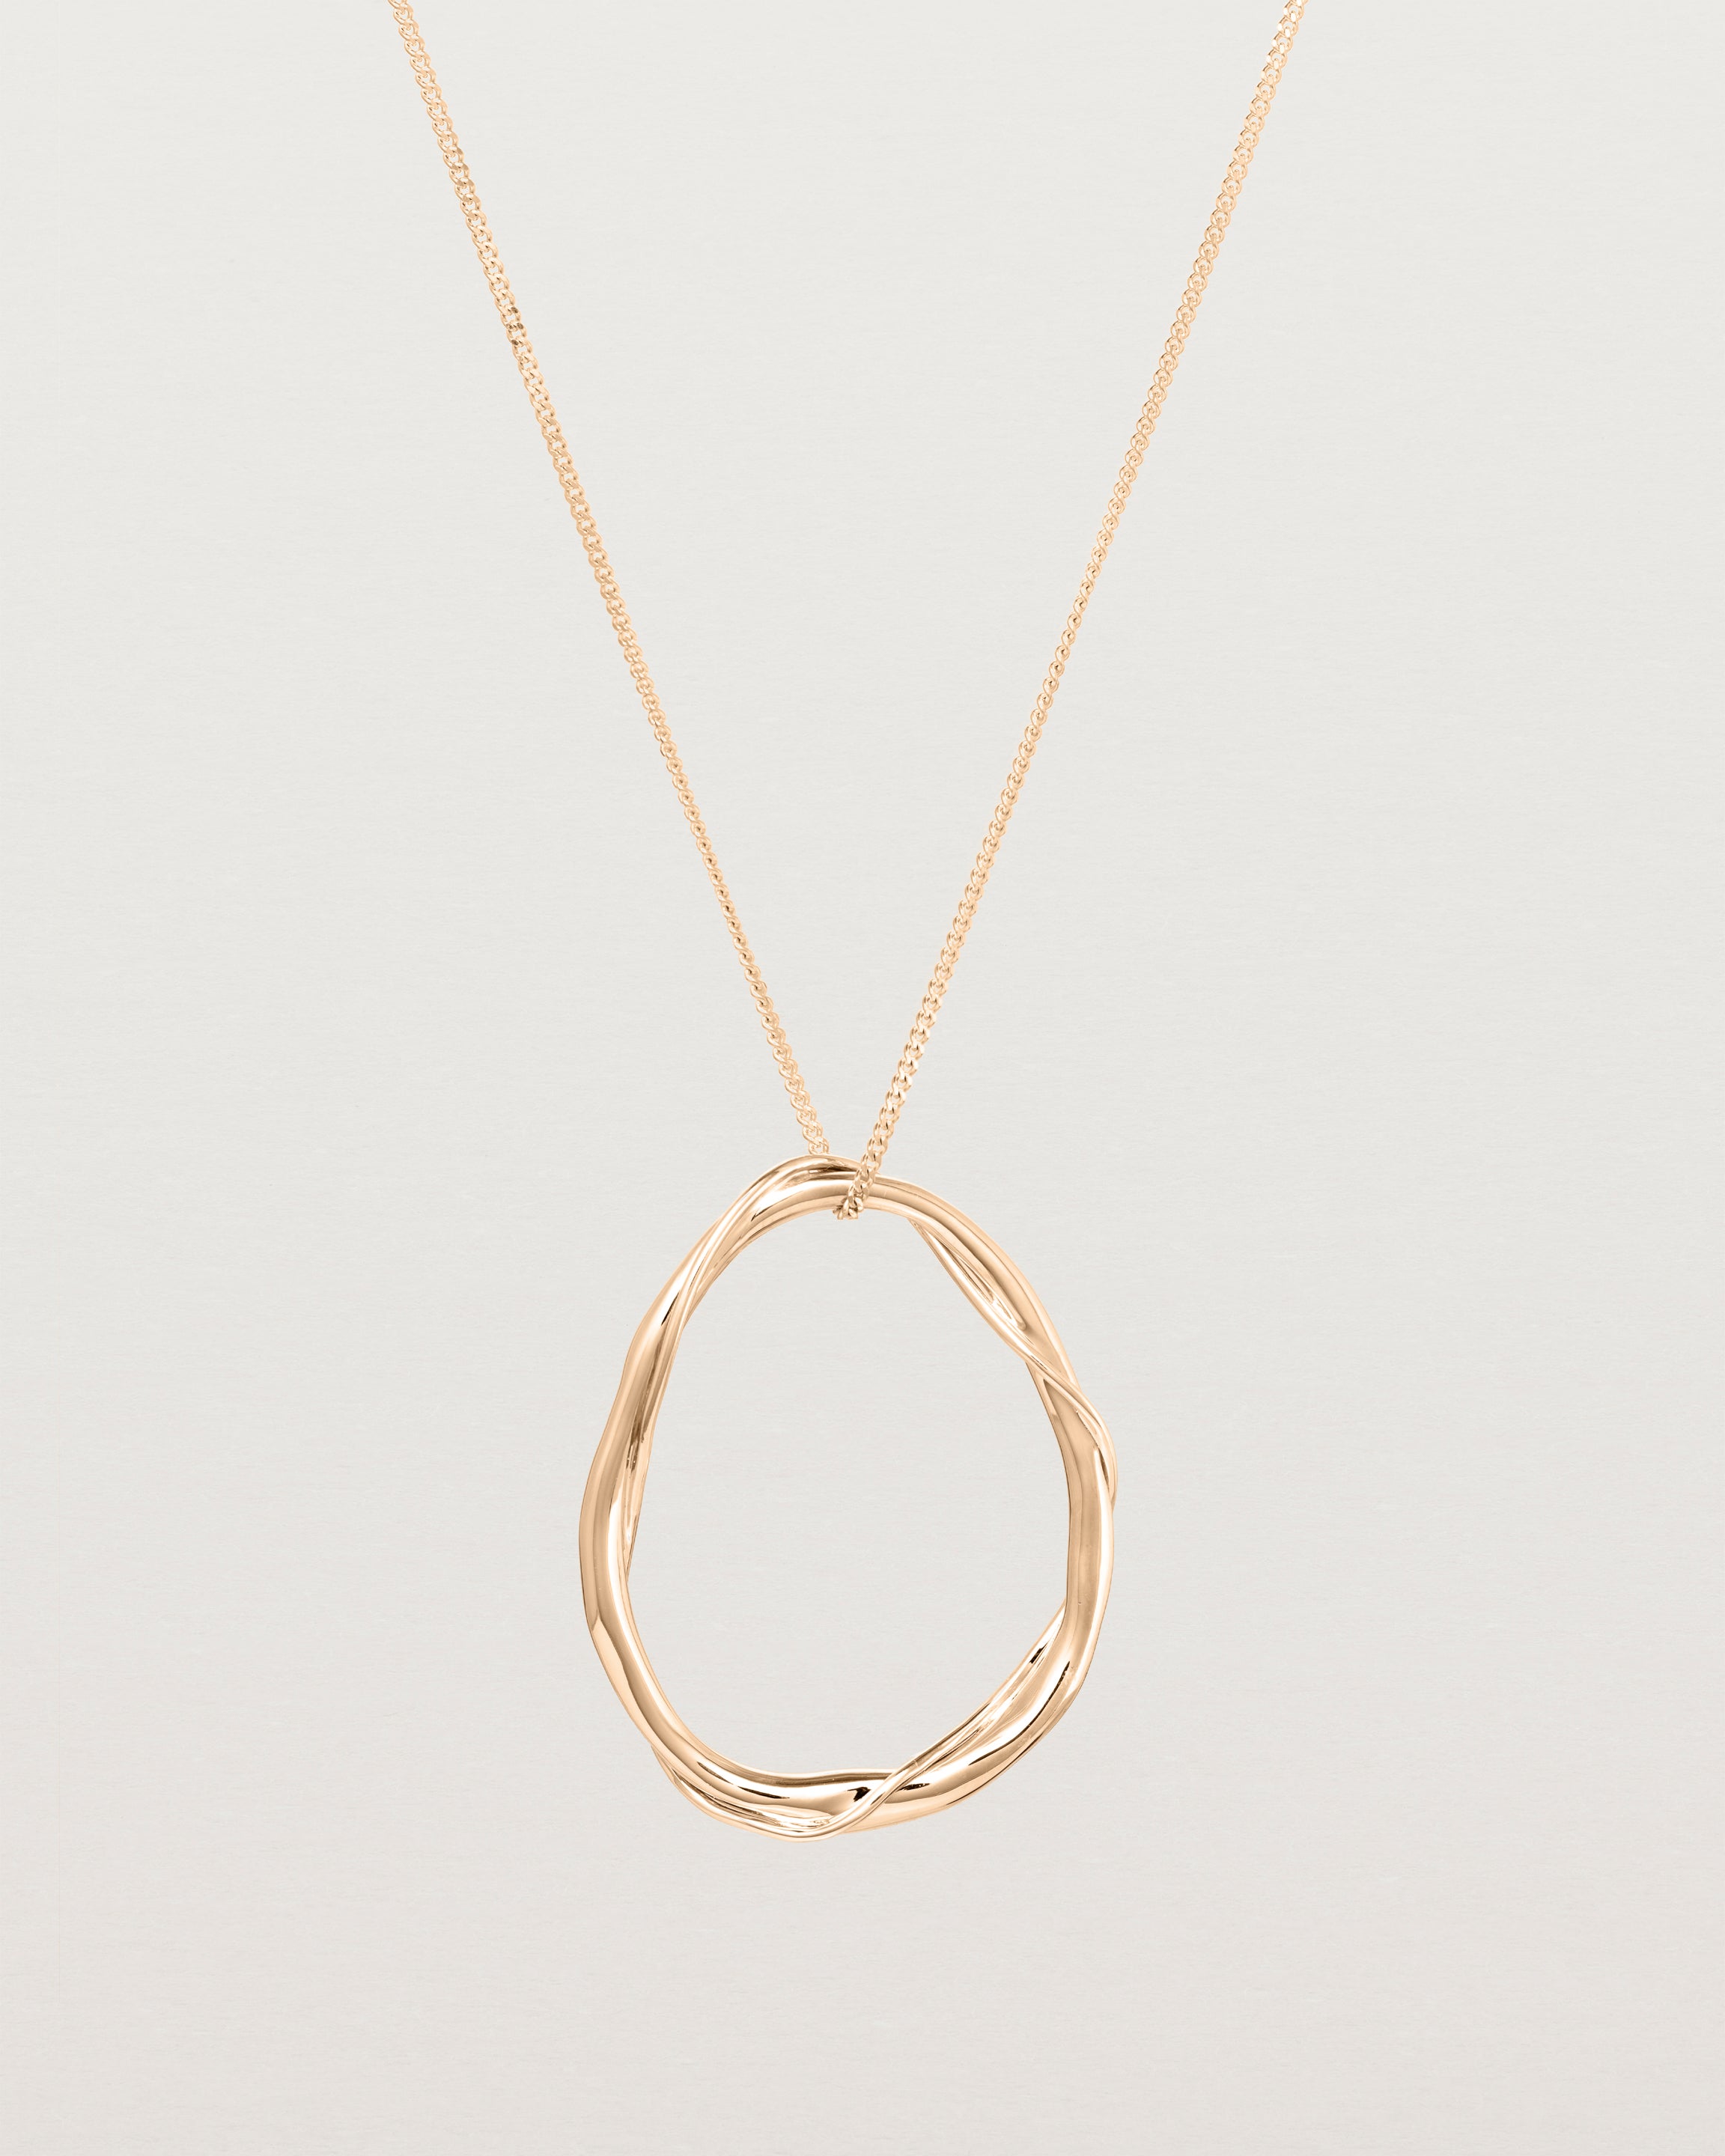 Front view of the Dalí Necklace in rose gold.